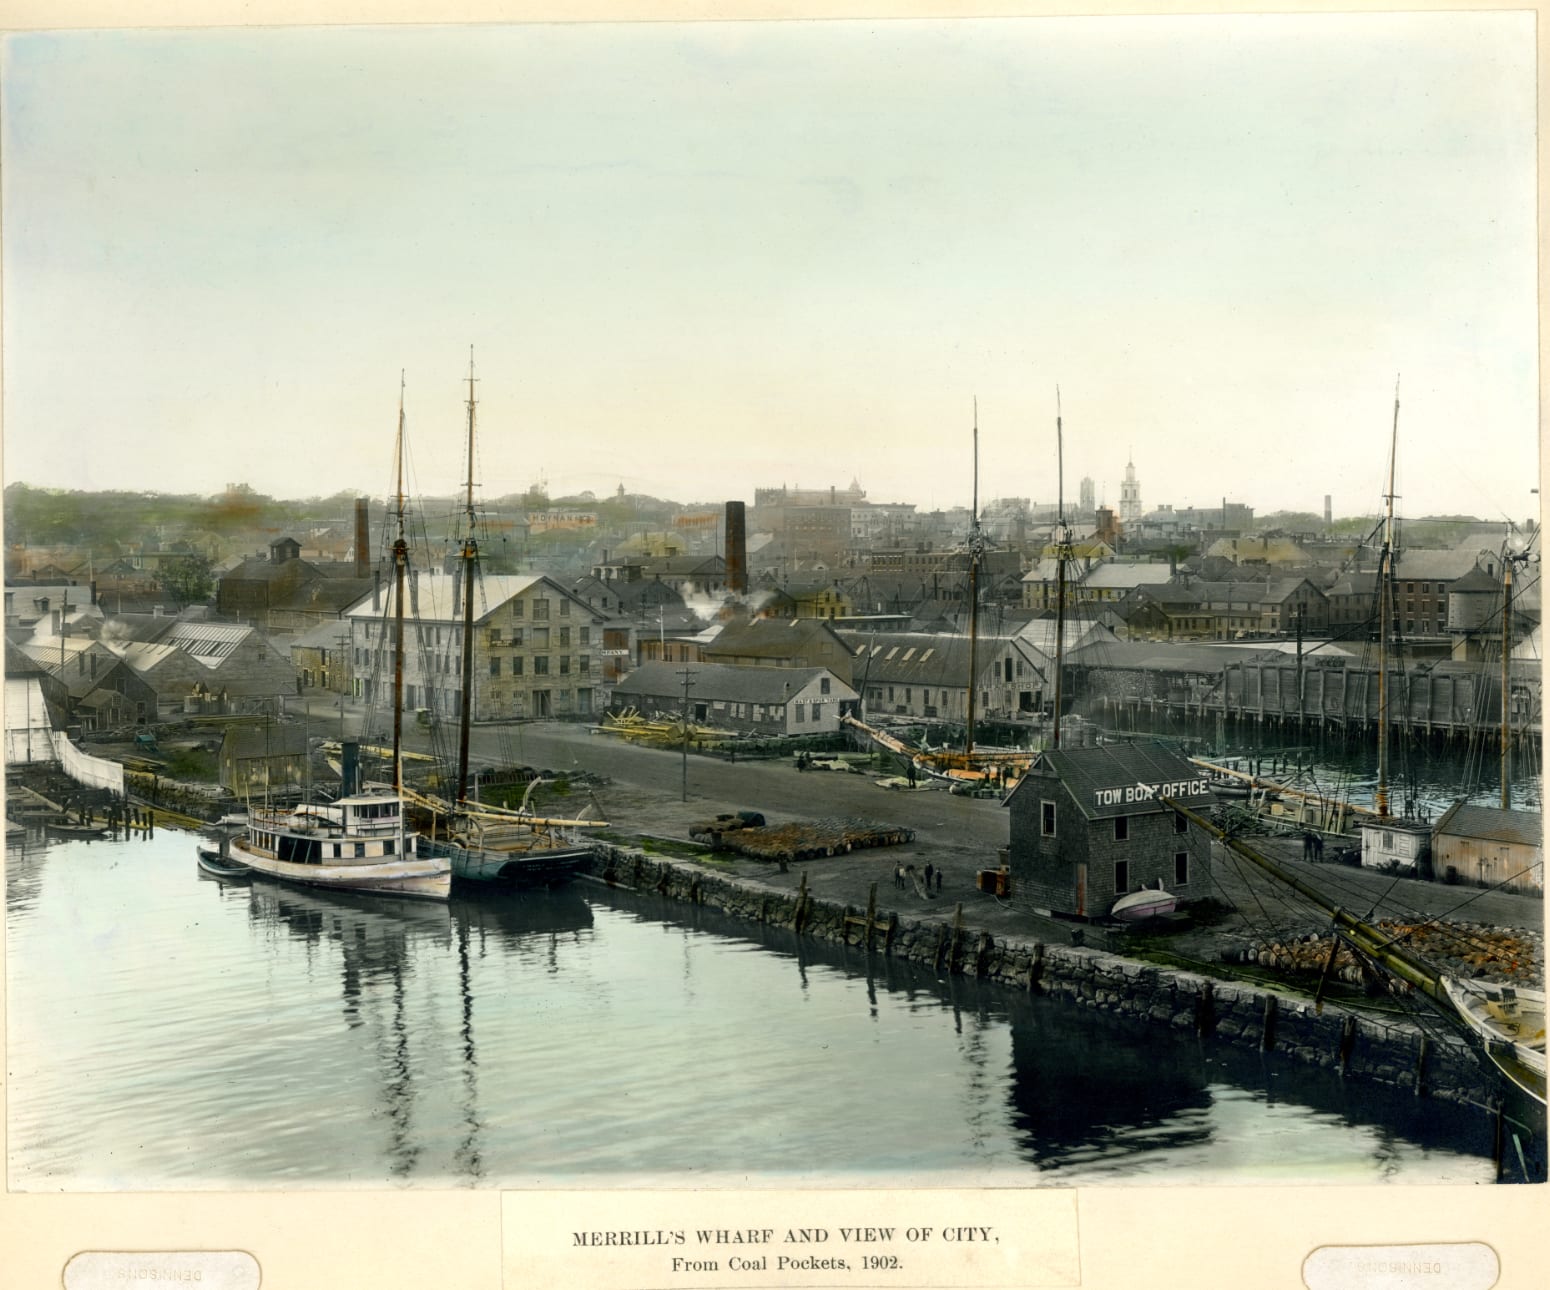 Image of Merrill's Wharf and a large part of New Bedford. Typed beneath the image: "Merrill's Wharf, and view of city, from Coal Pockets, 1902."